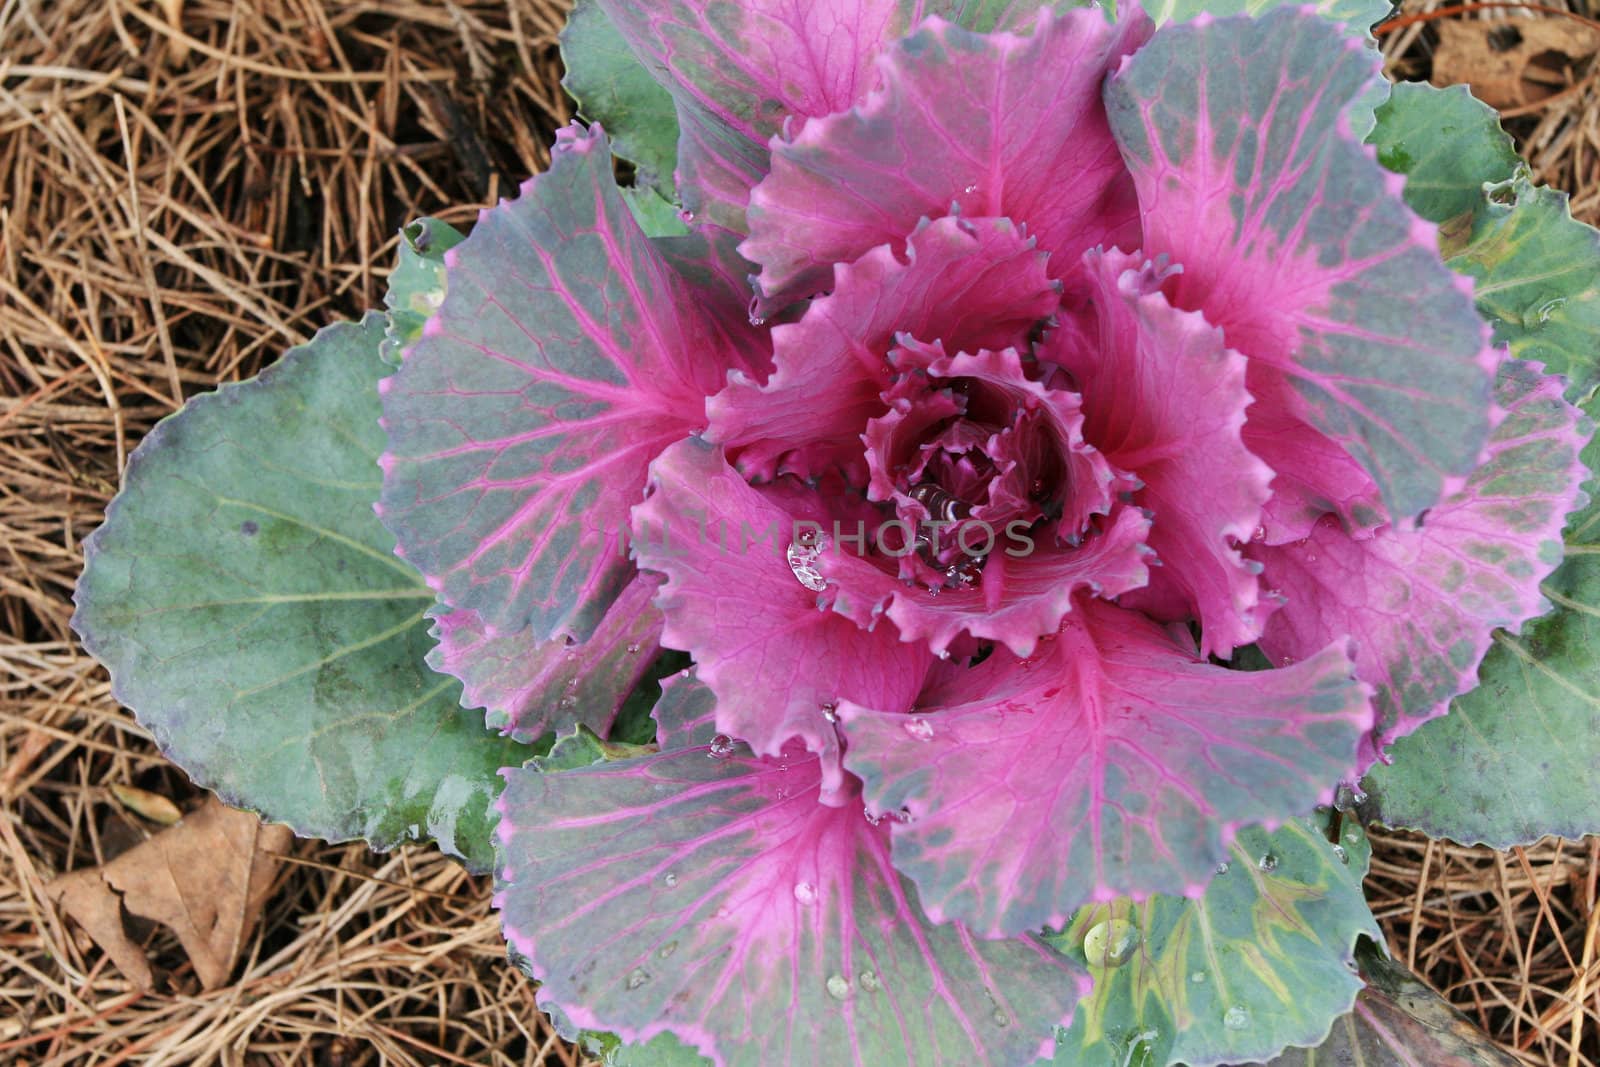 A Red Cabbage